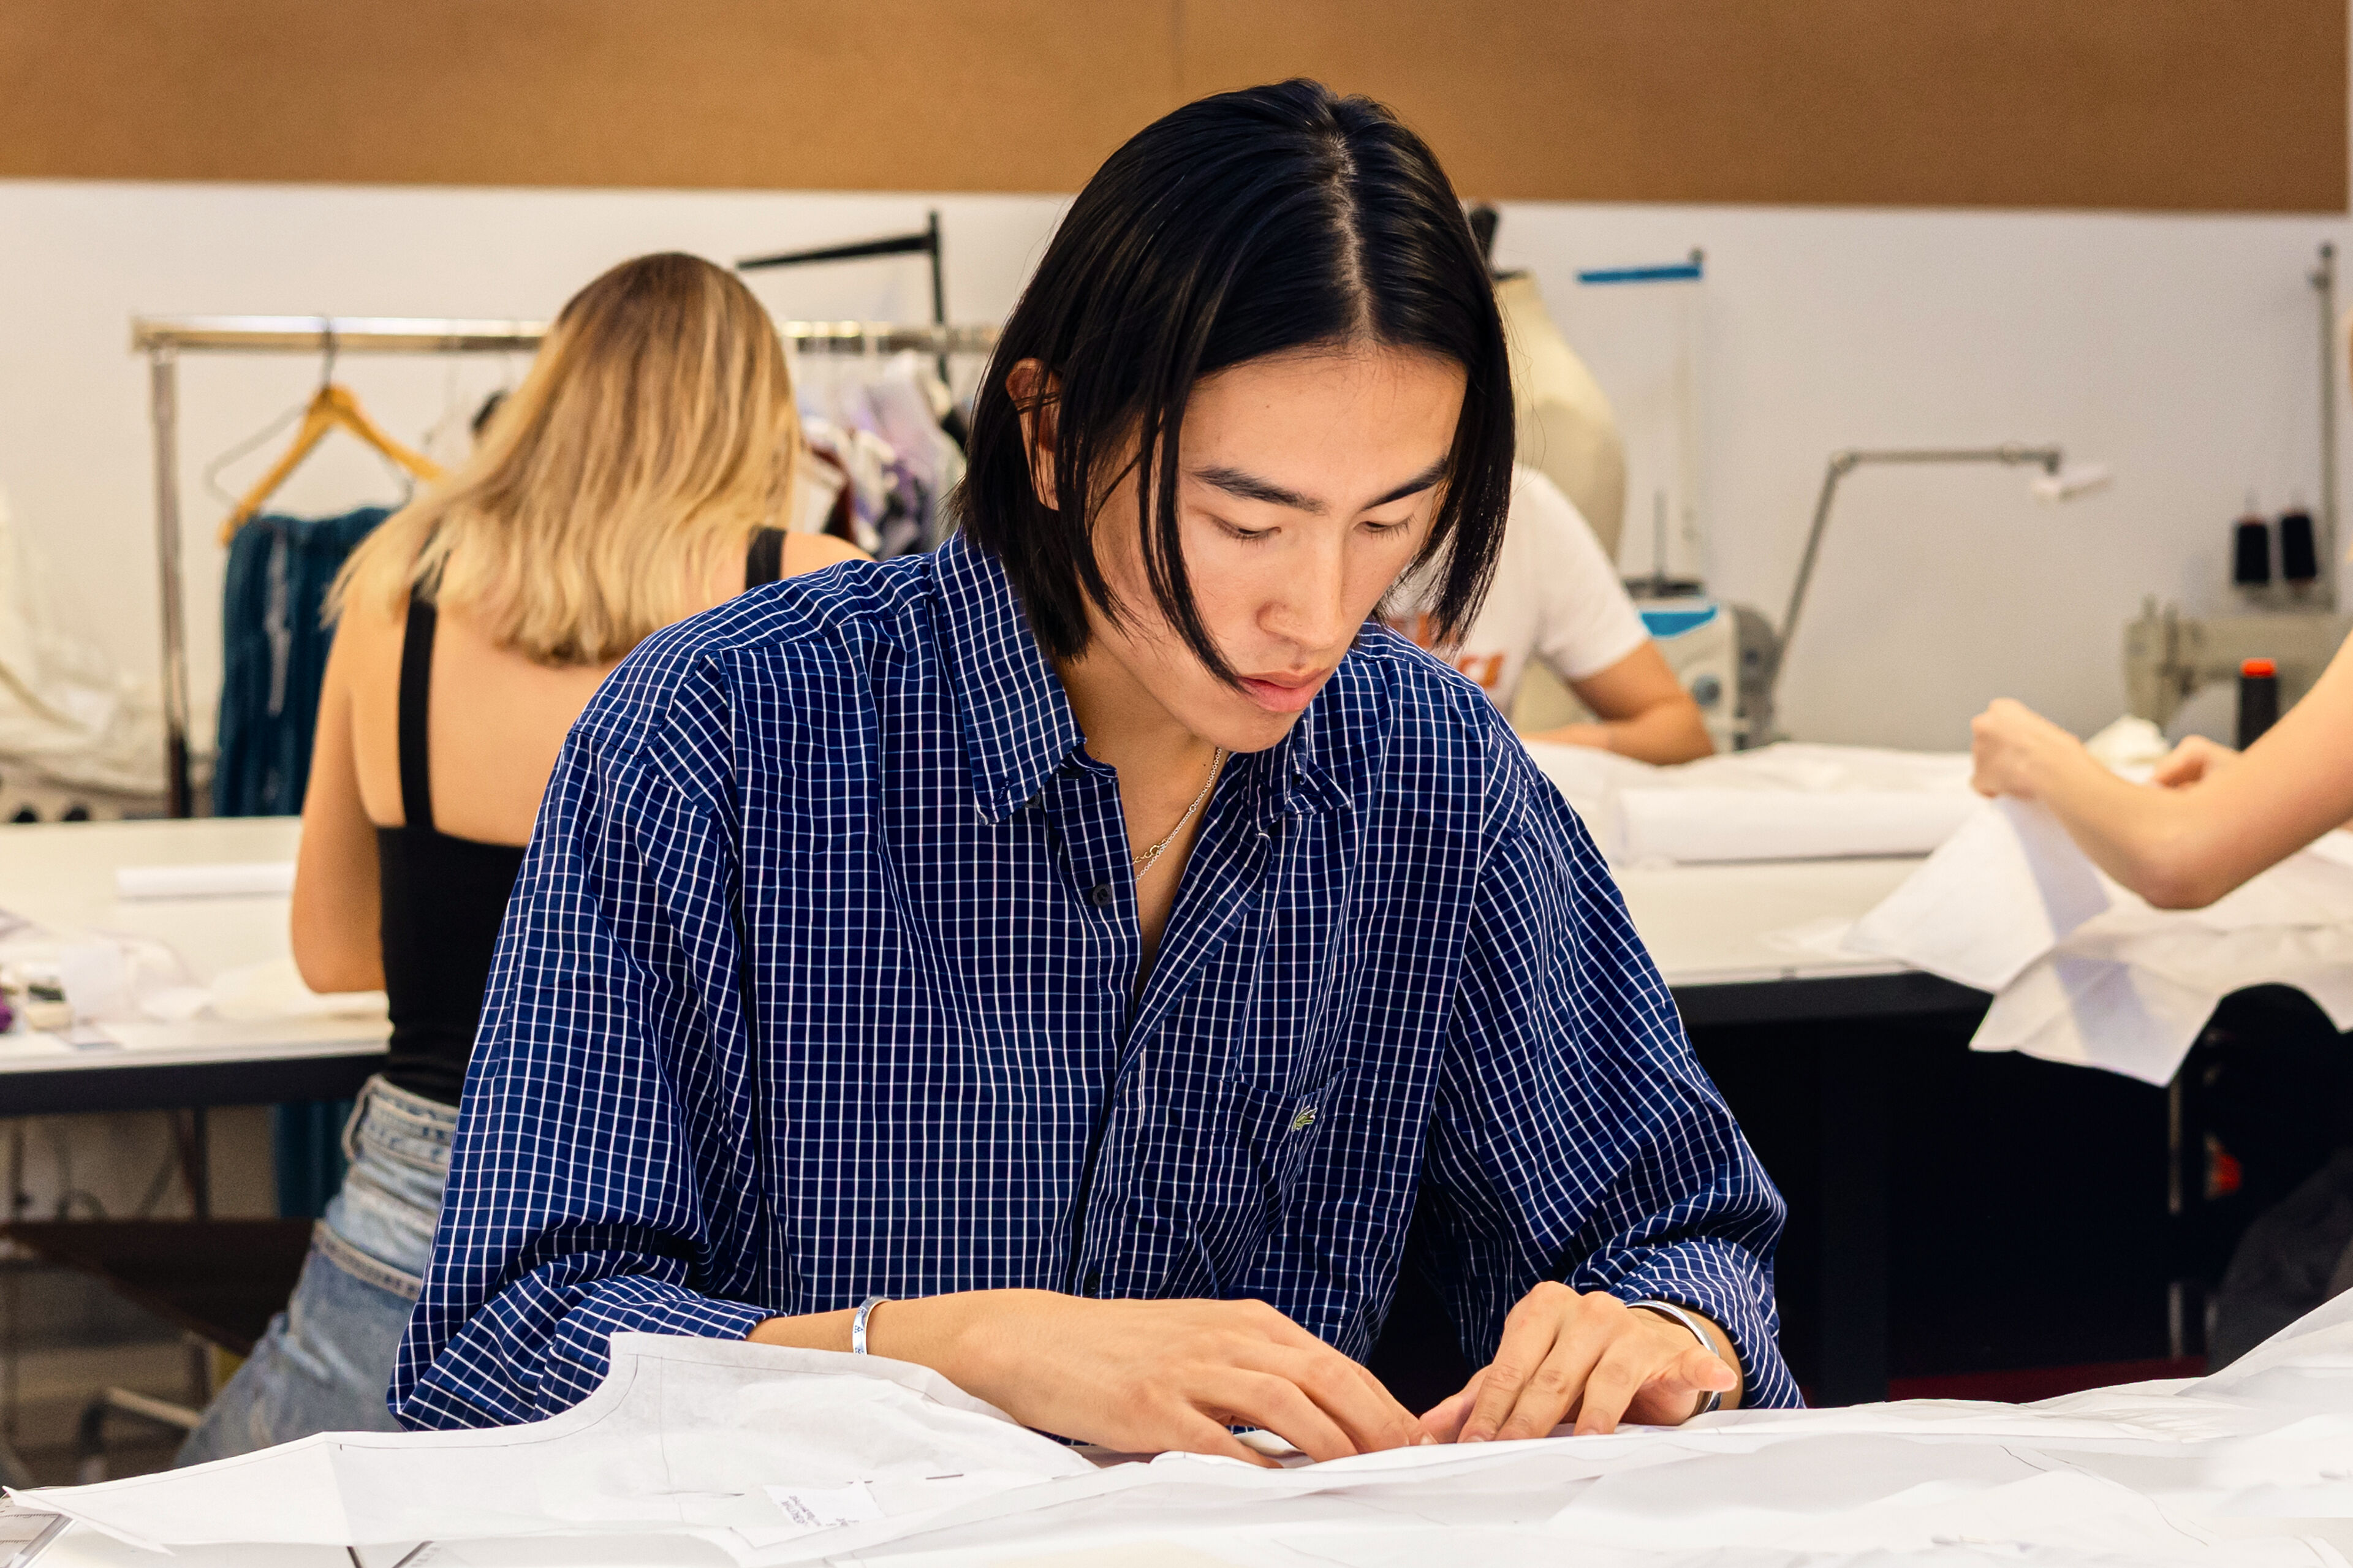 A diligent fashion student in a blue checked shirt, engrossed in drafting a pattern.